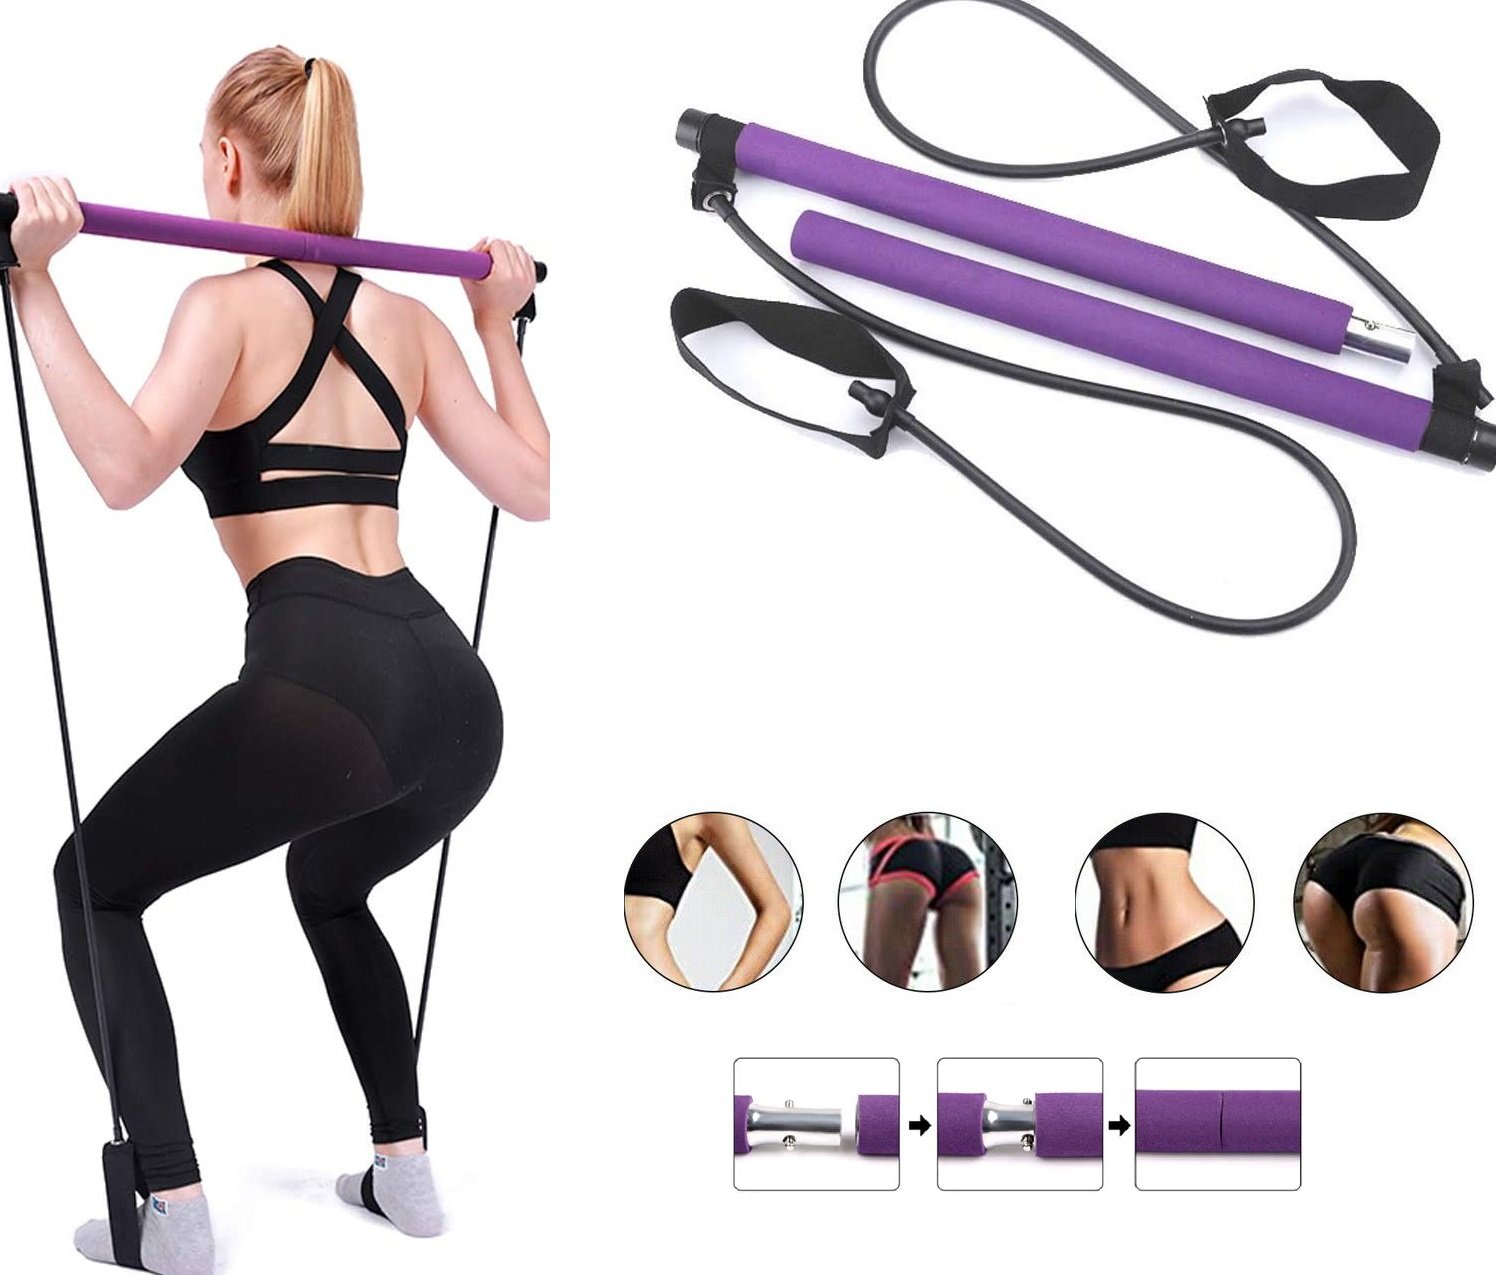 The New Premium Pilates Bar Kit with Resistance-6 bands (15, 30, 50 lbs)